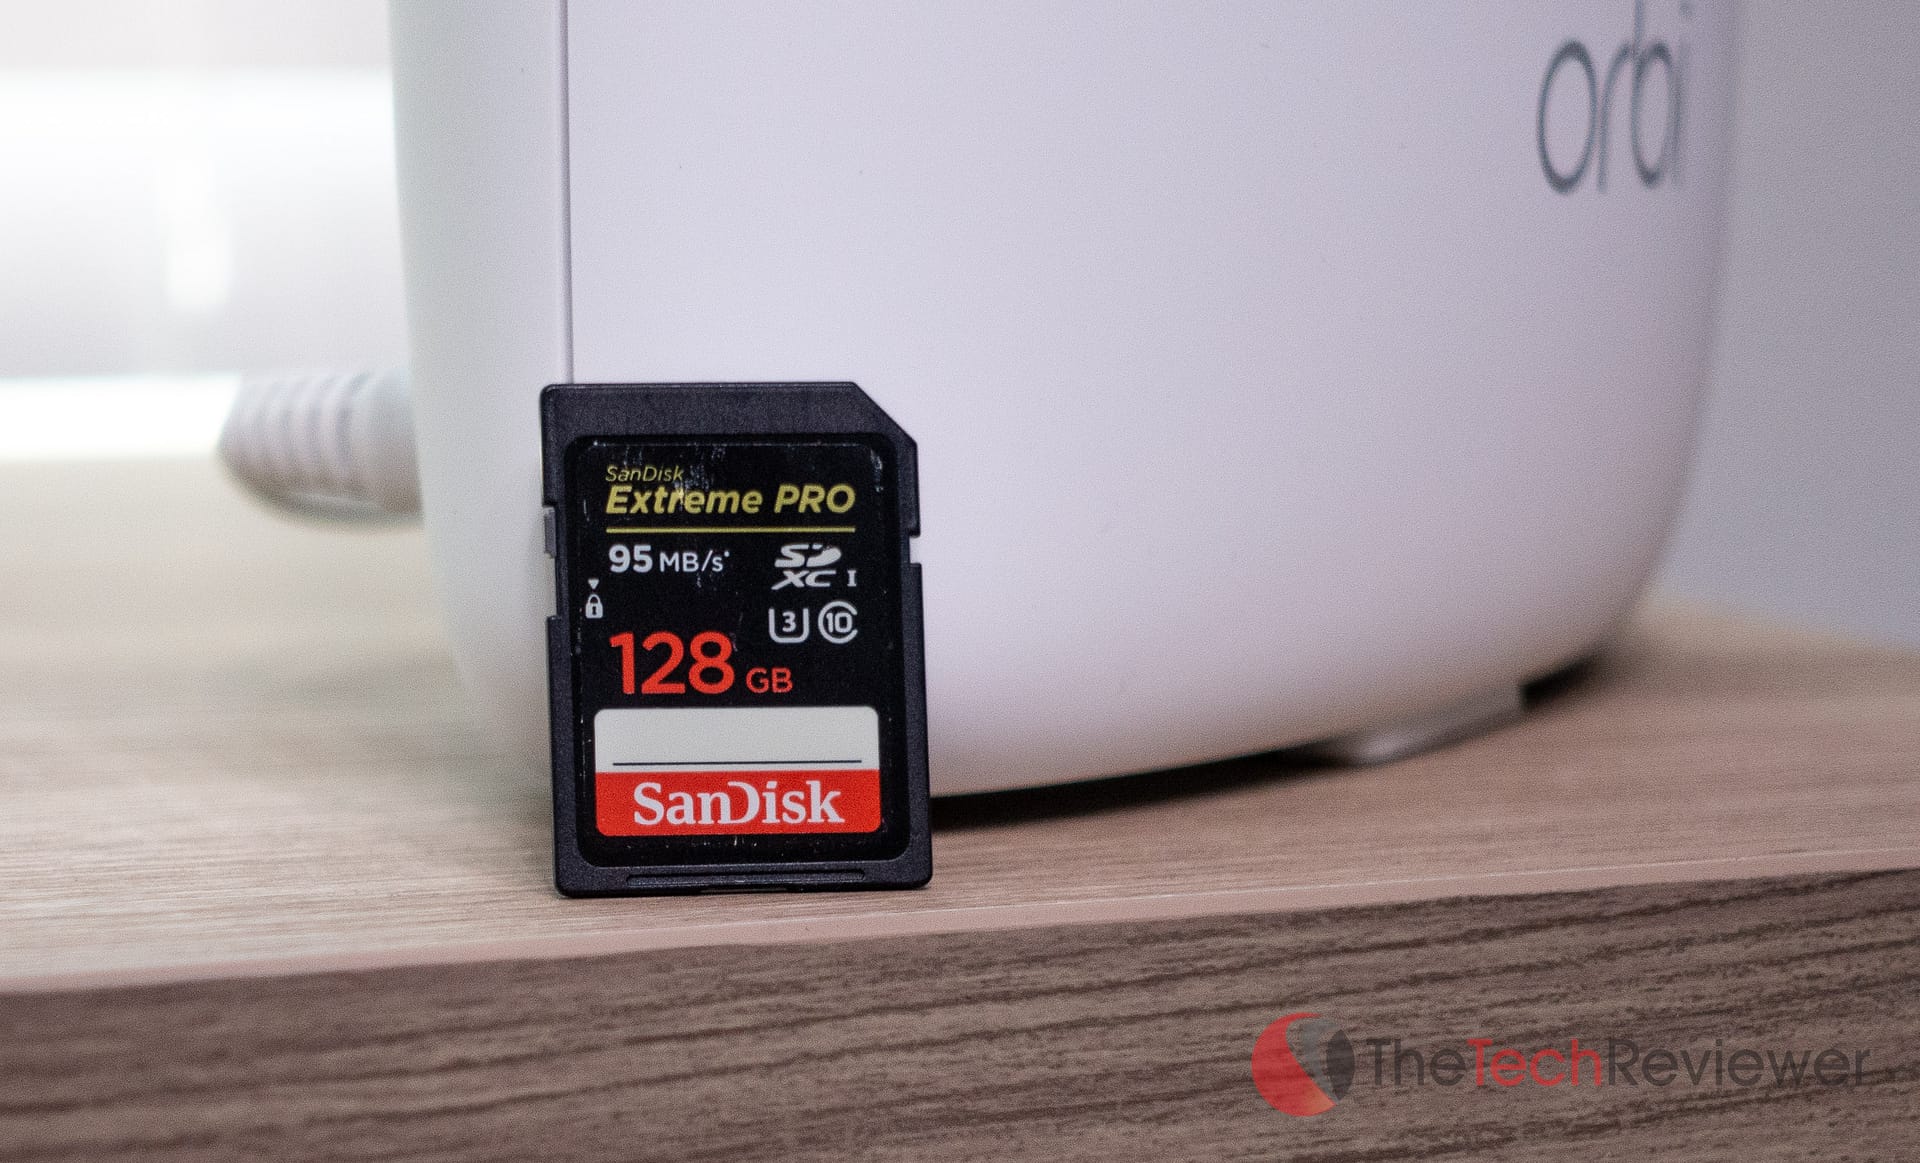 How to Tell if a Sandisk SD Card is Fake?